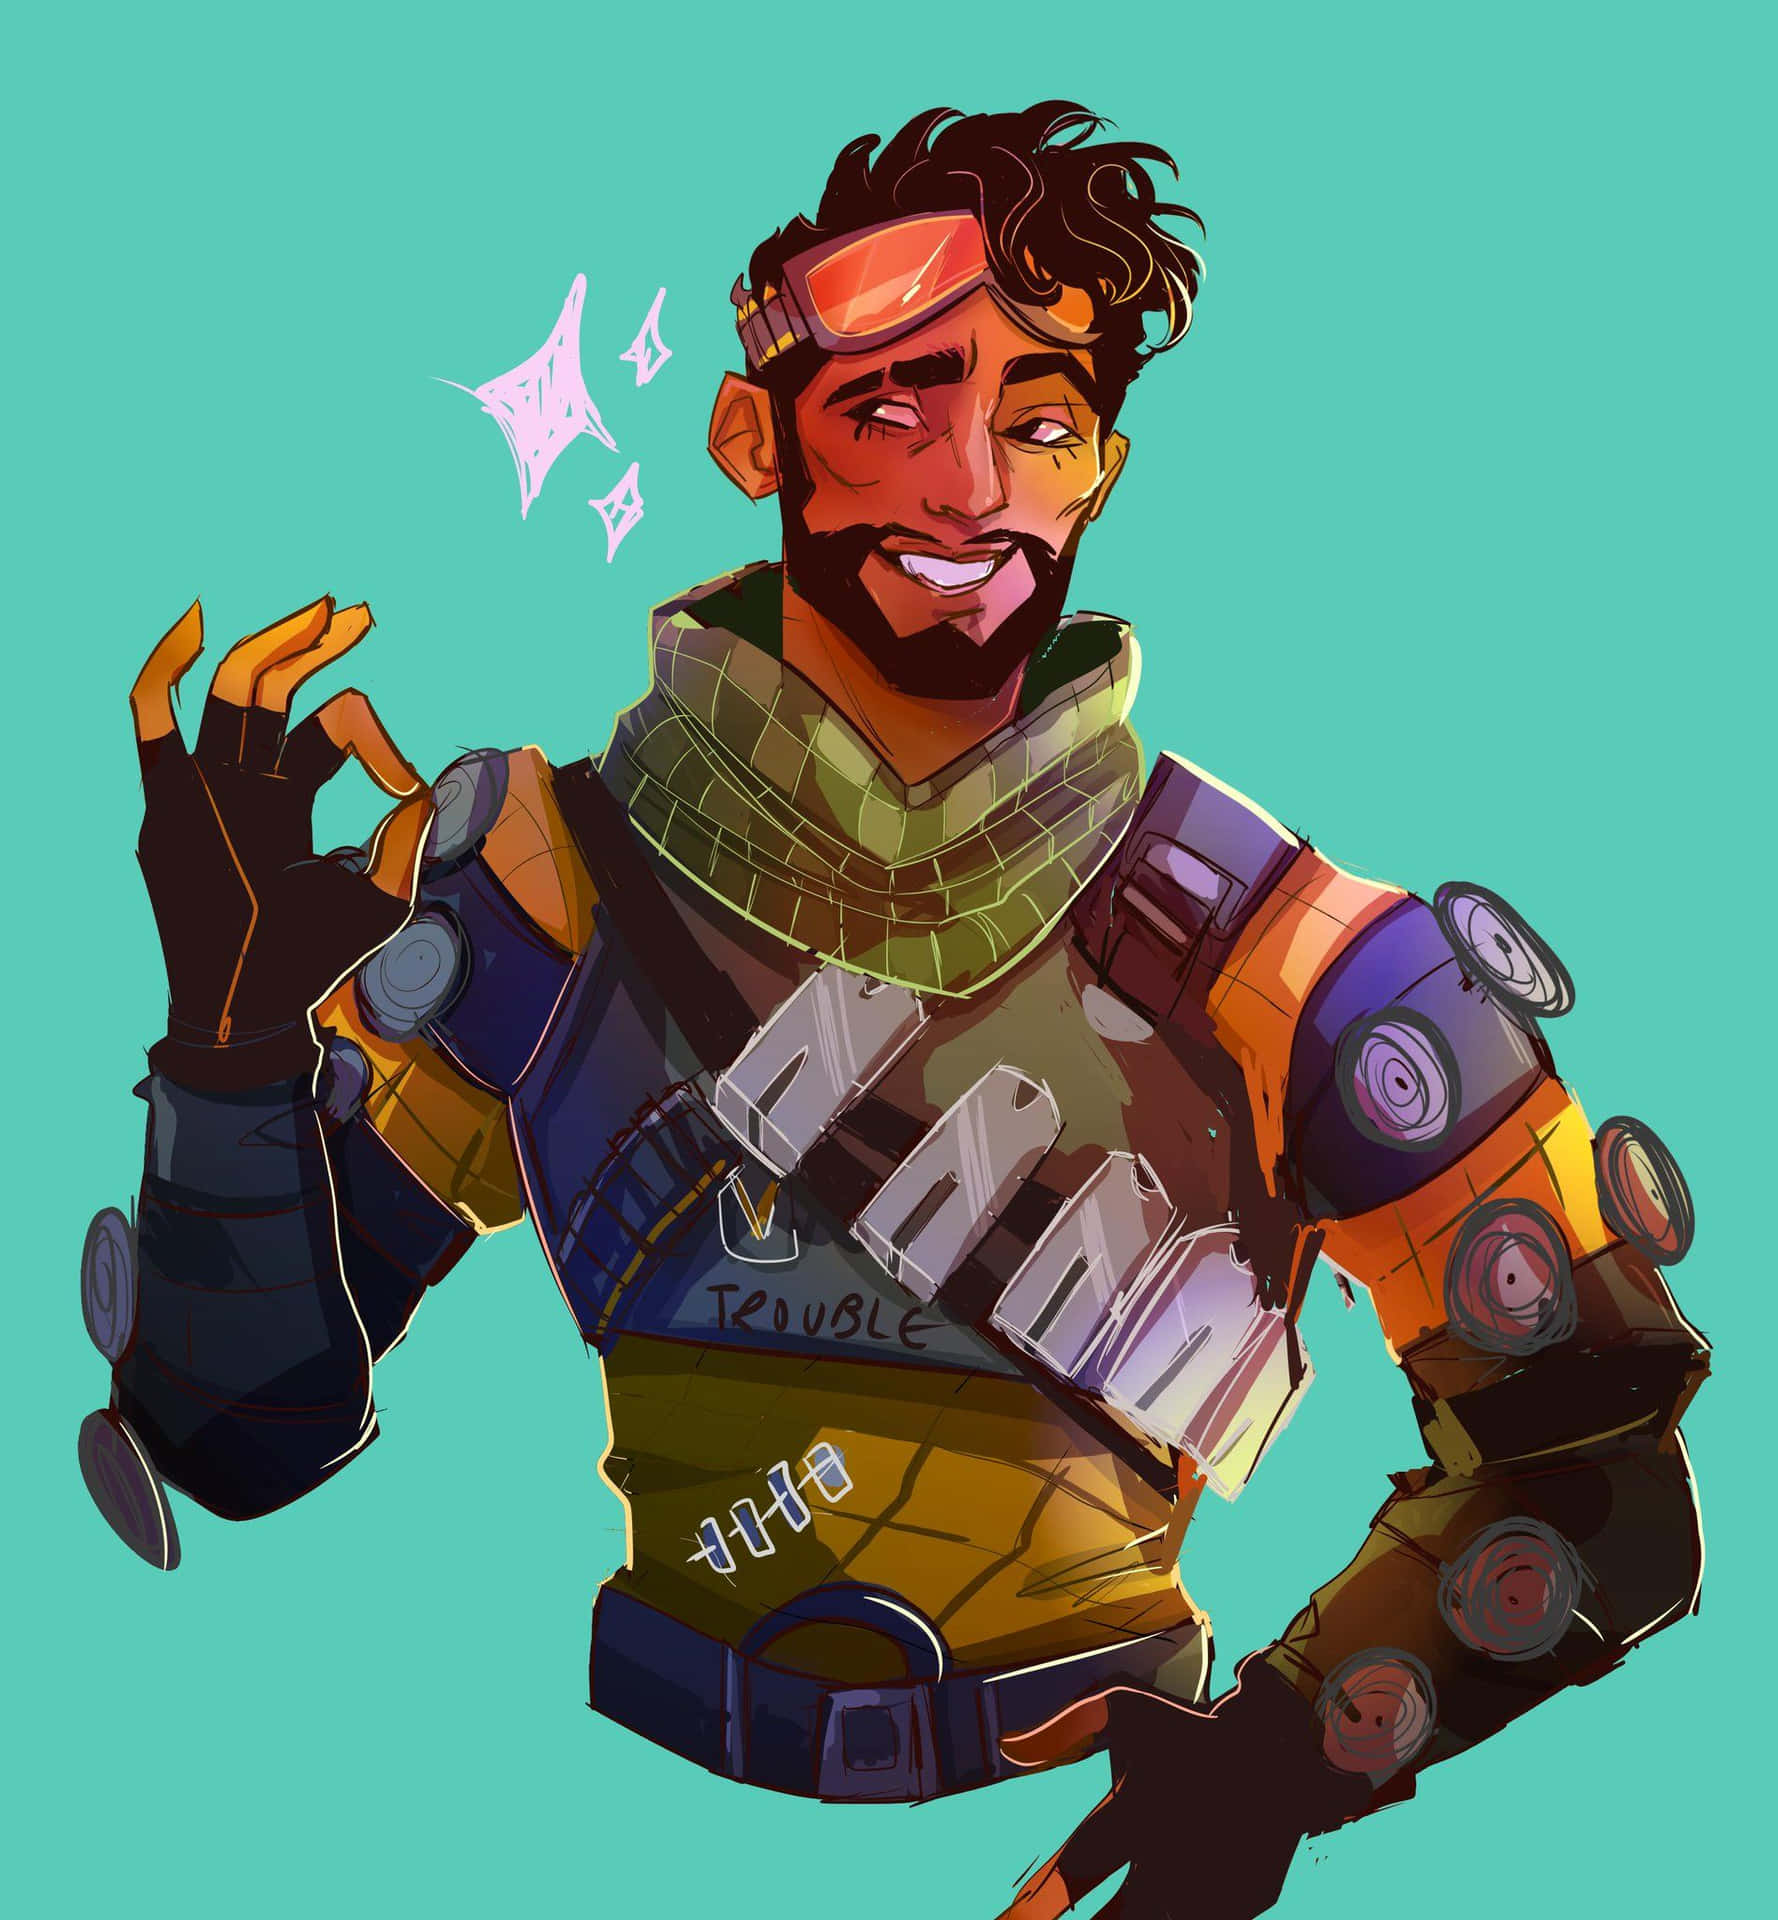 Exciting Artwork Of Apex Legends Characters Wallpaper